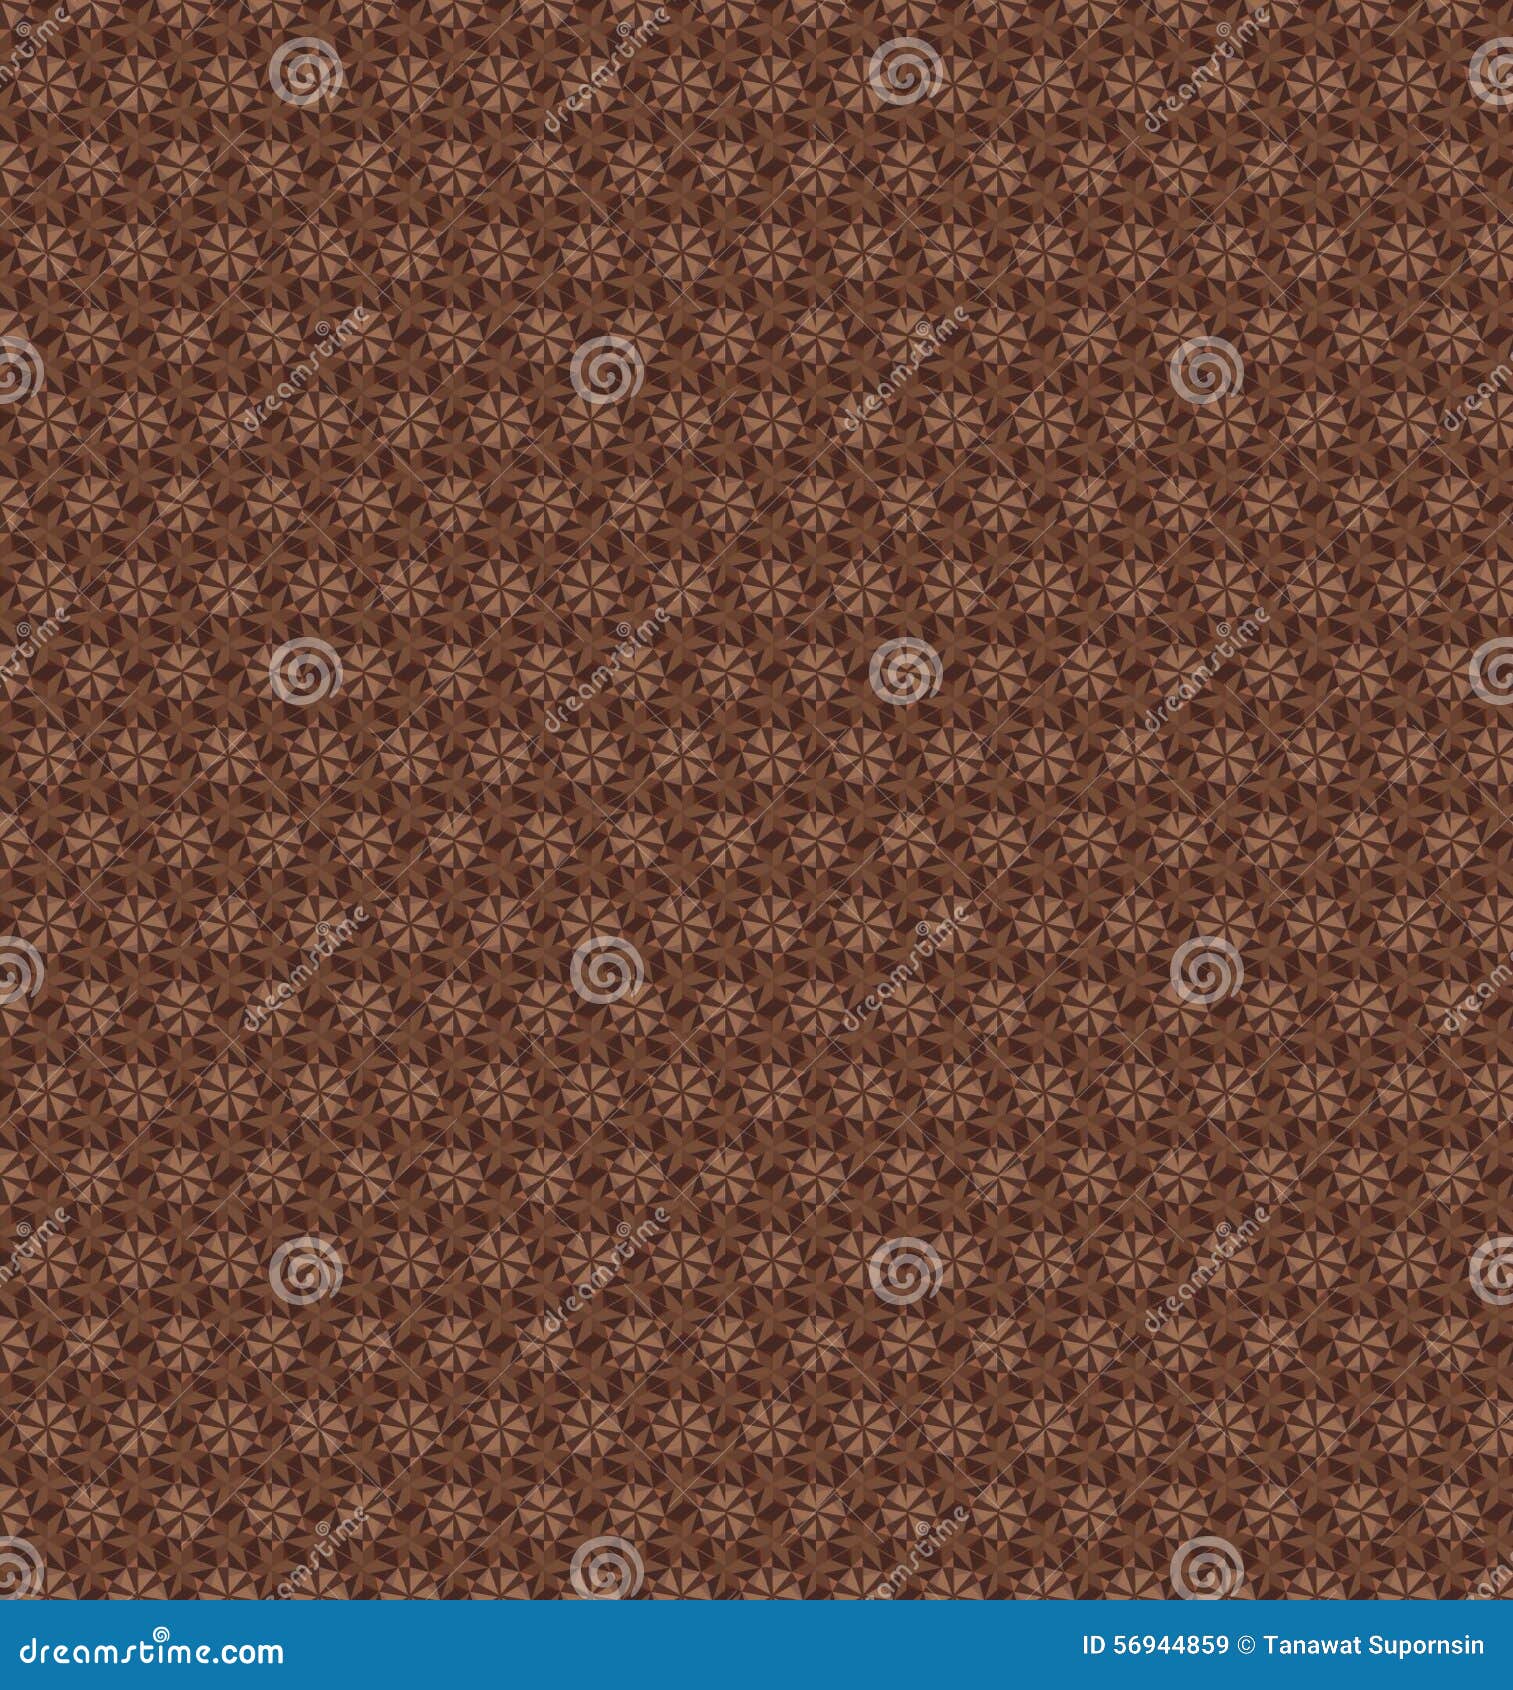 Abstract Chocolate Brown Color Pattern Wallpaper Stock Image - Image of  background, abstract: 56944859